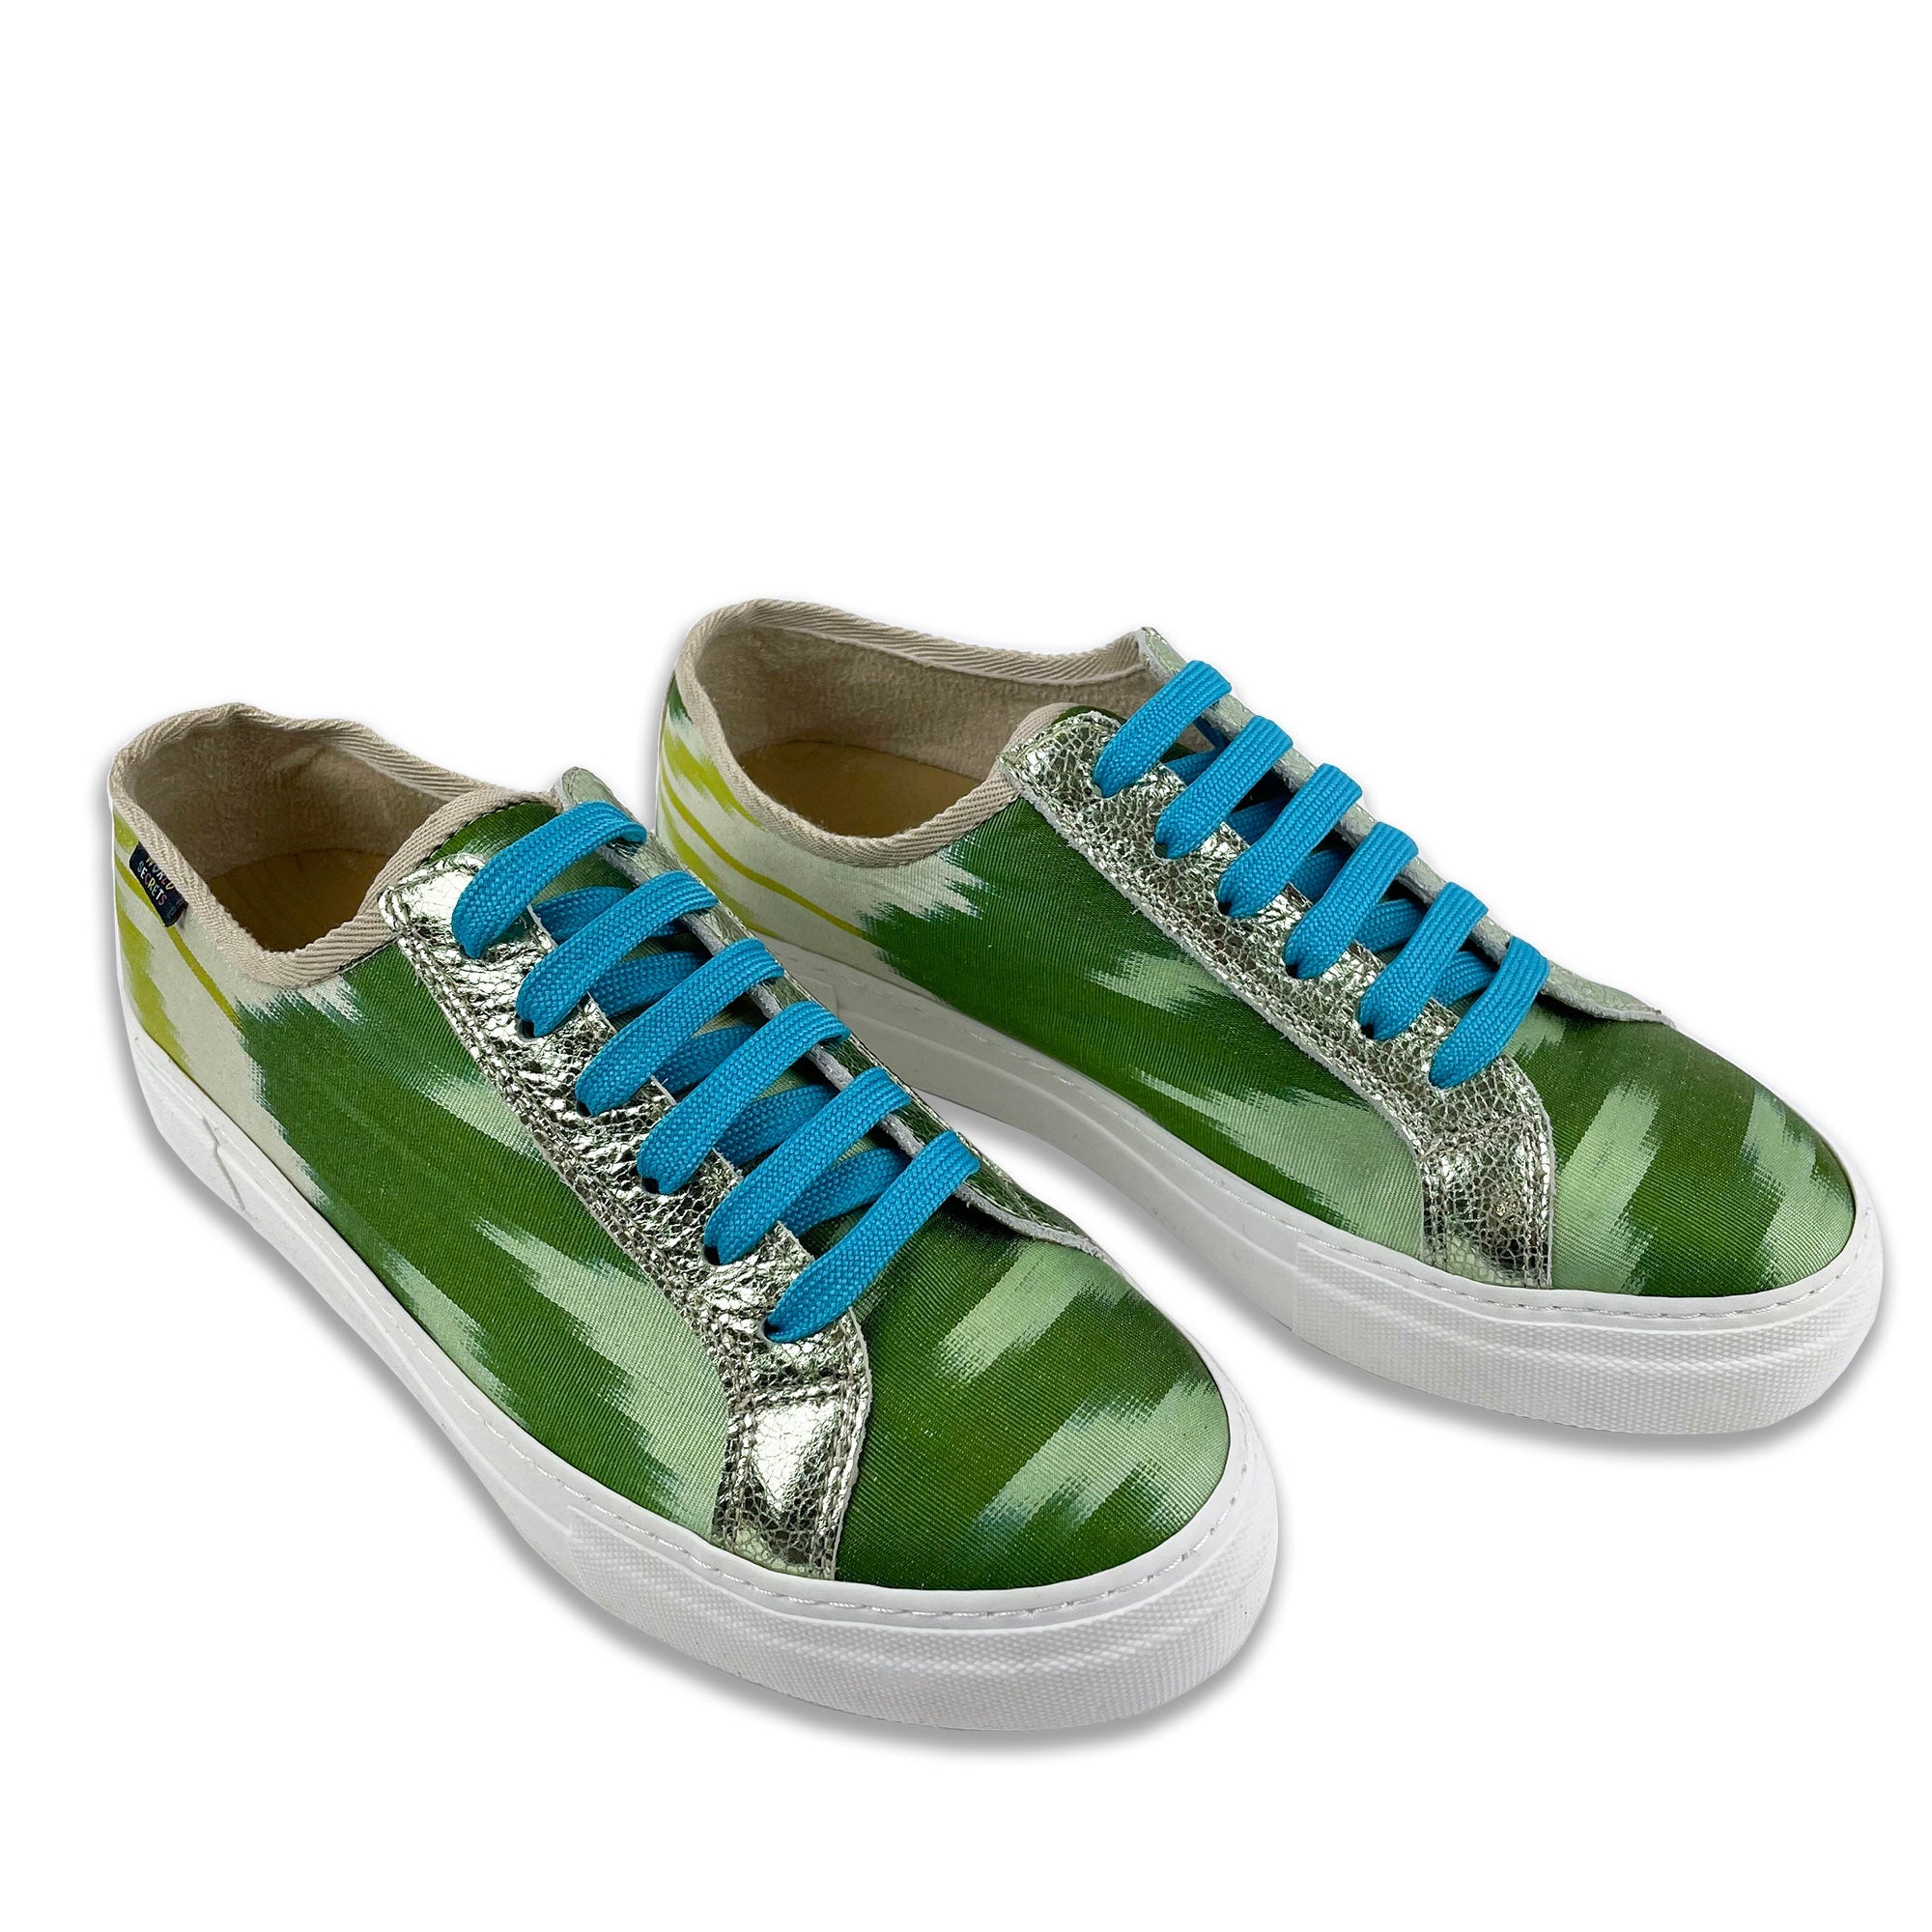 Eat Your Greens - 'She Who Dares' Sneakers